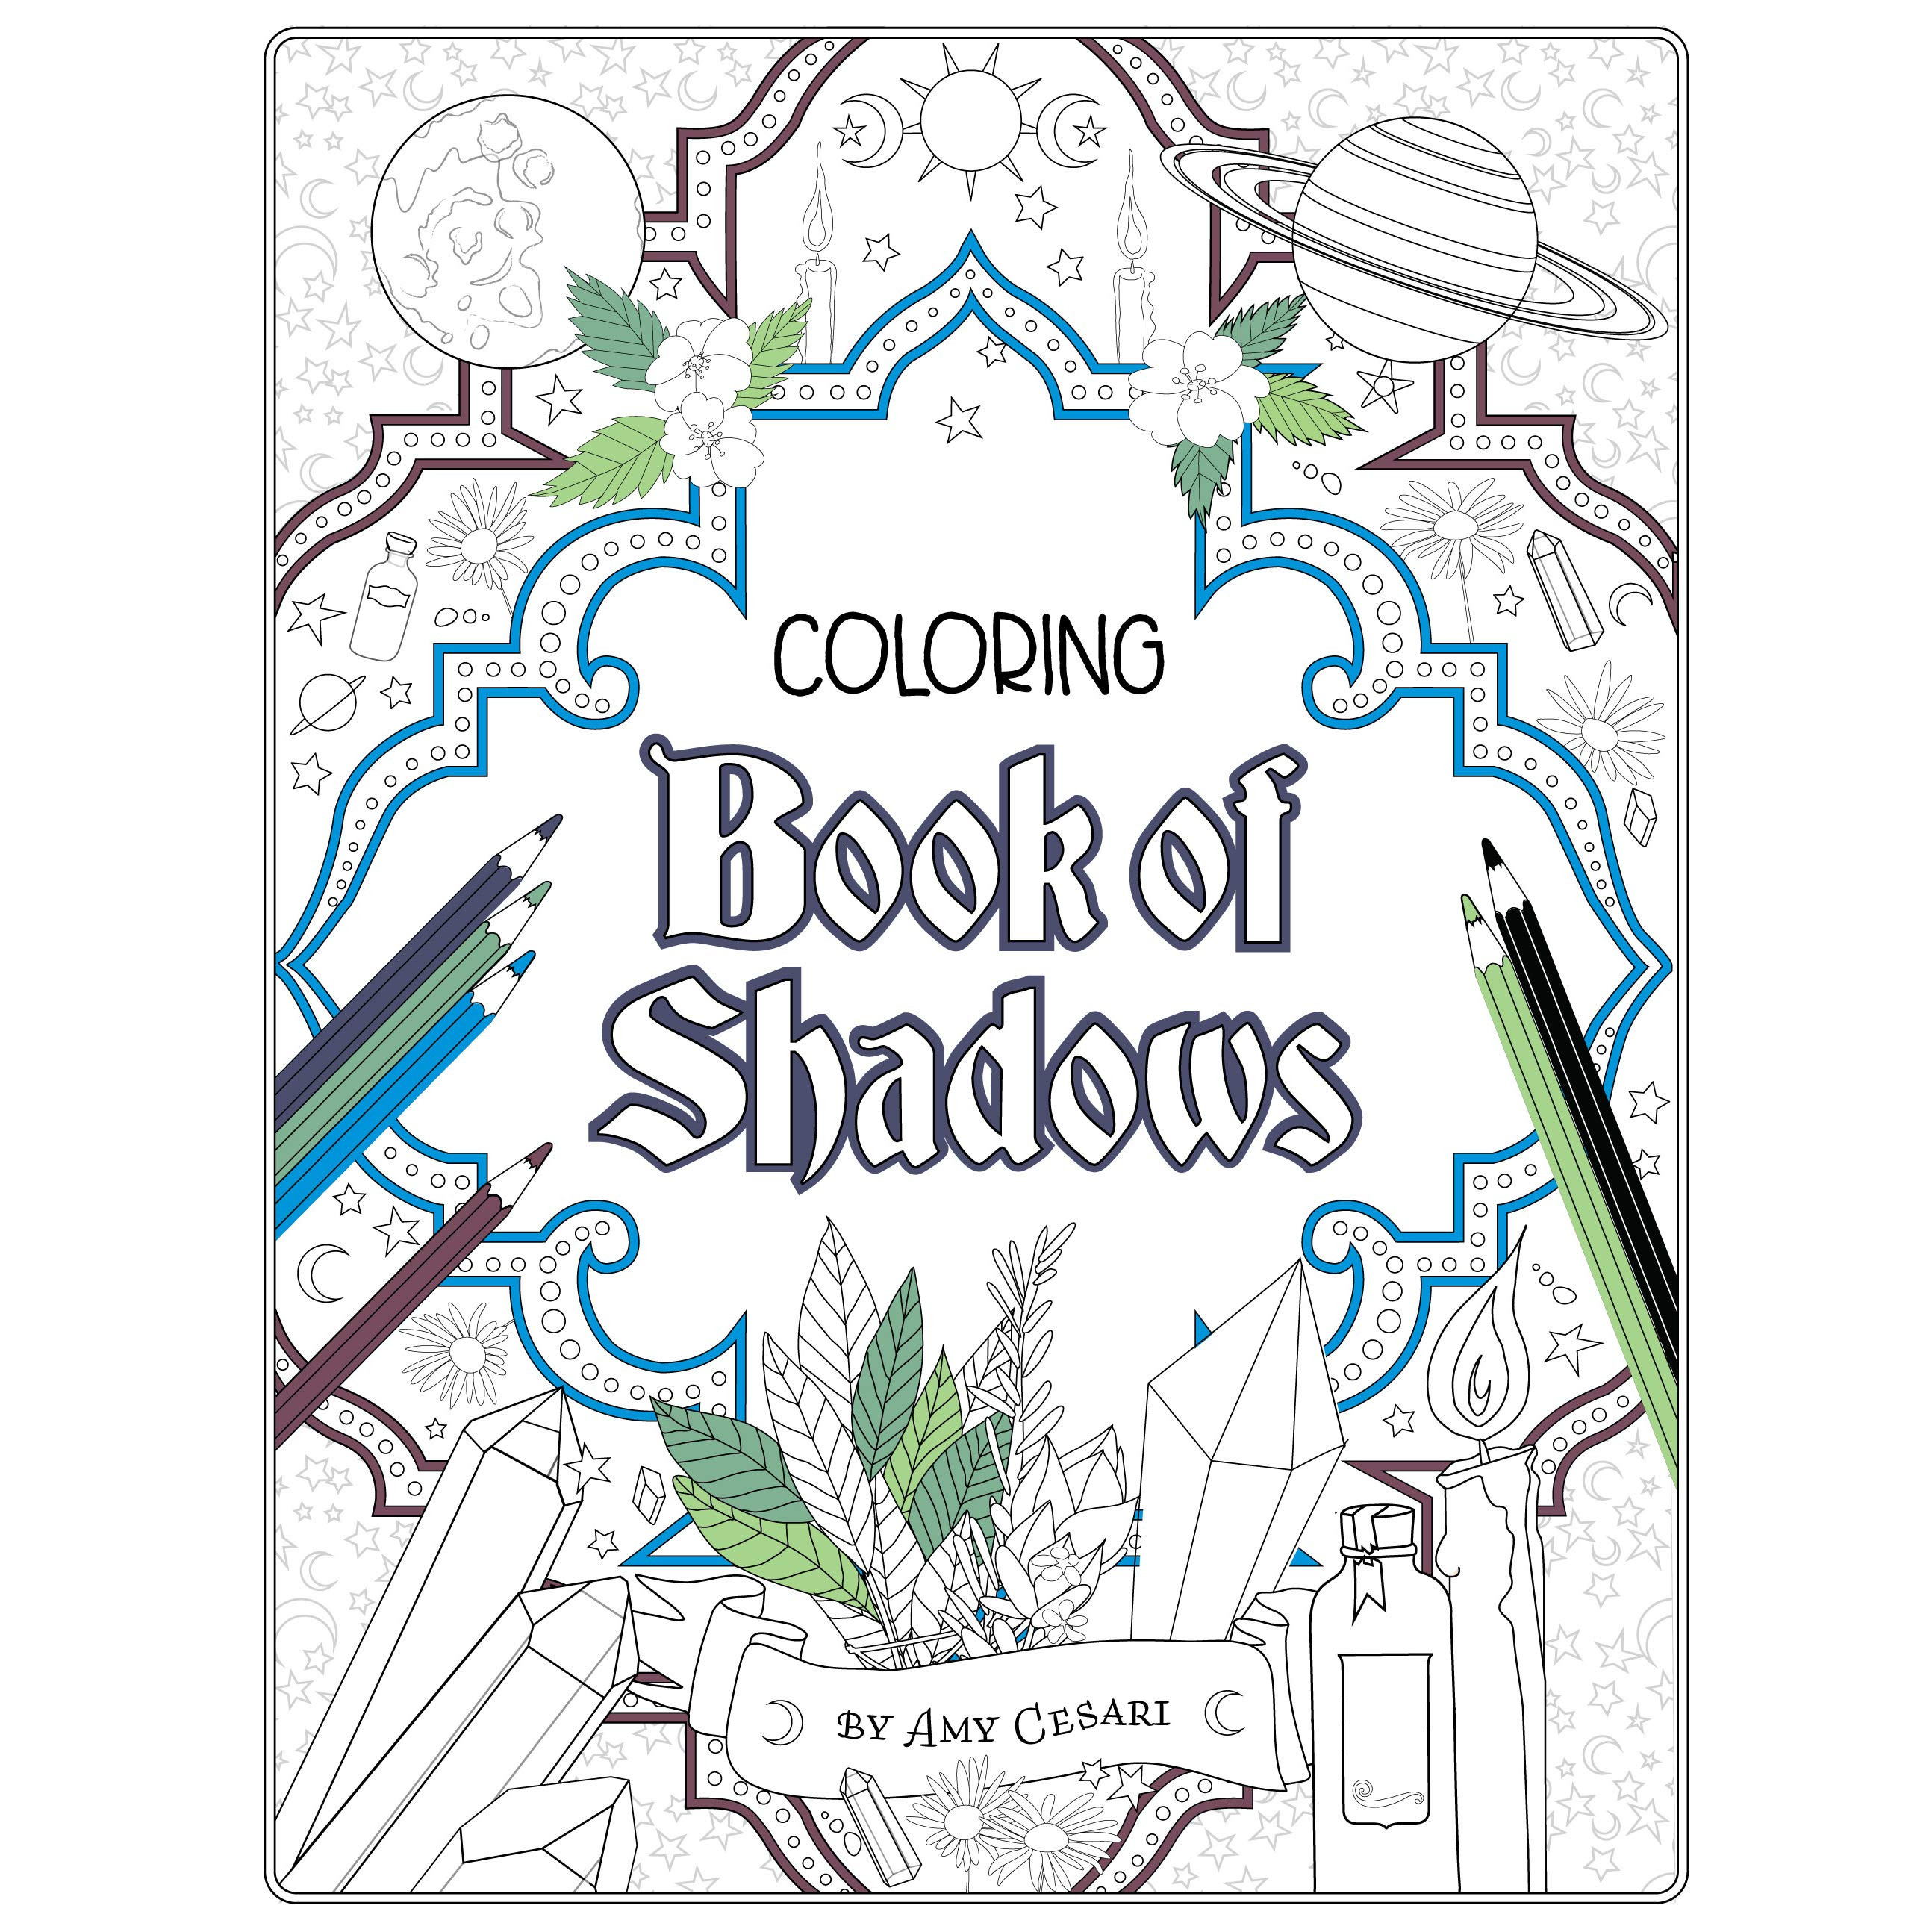 Book Of Shadows Coloring Pages
 Book giveaway for Coloring Book of Shadows by Amy Cesari